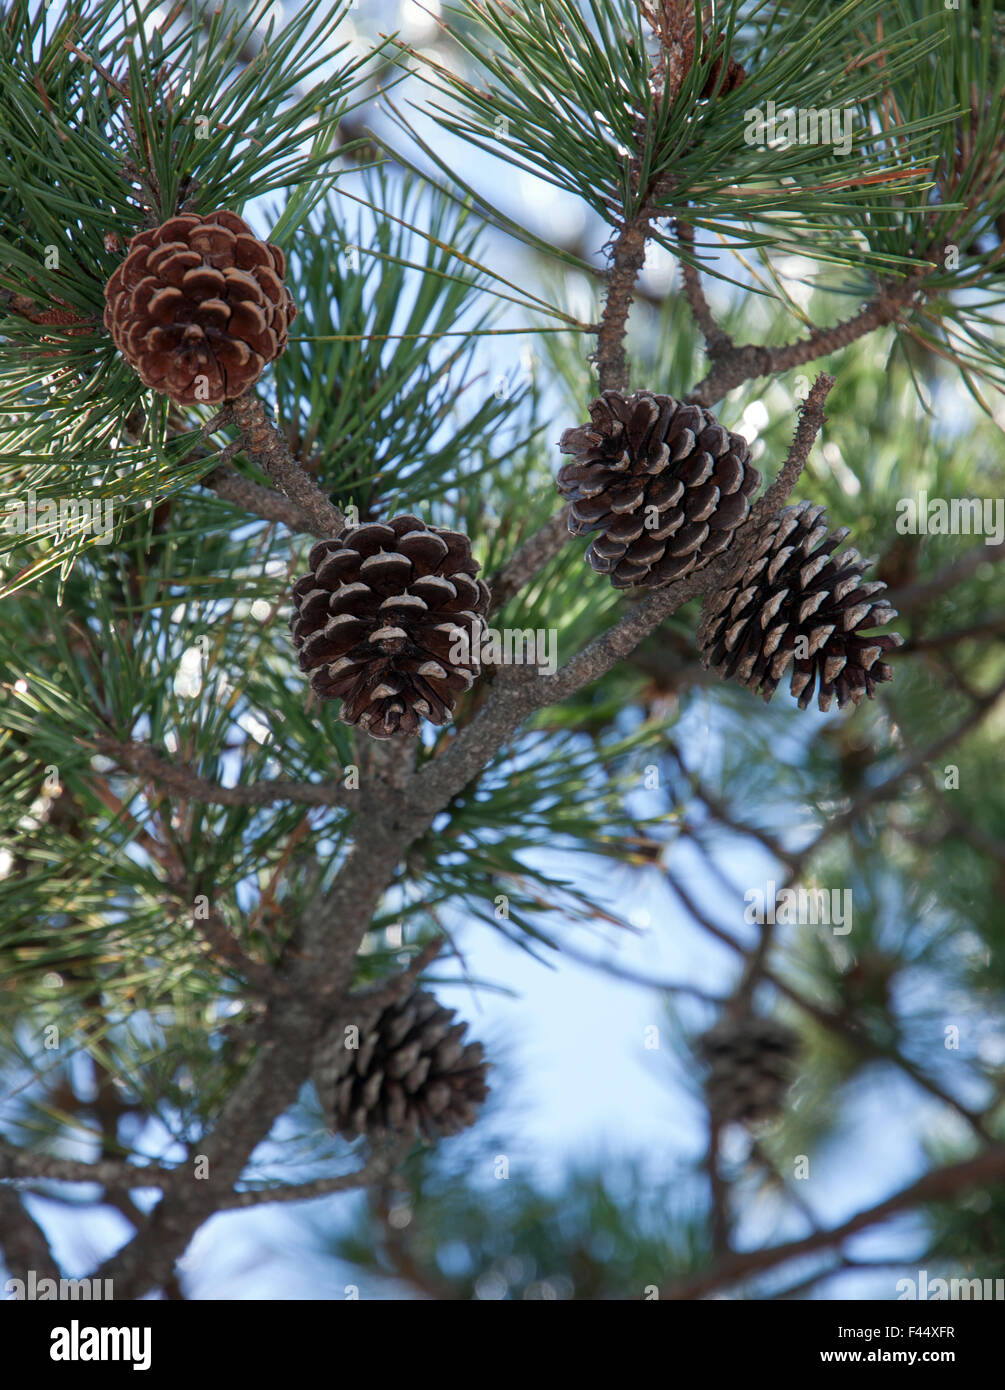 Pitch pine (Pinus rigida) cones and needles on branches in Massachusetts, United States. Stock Photo